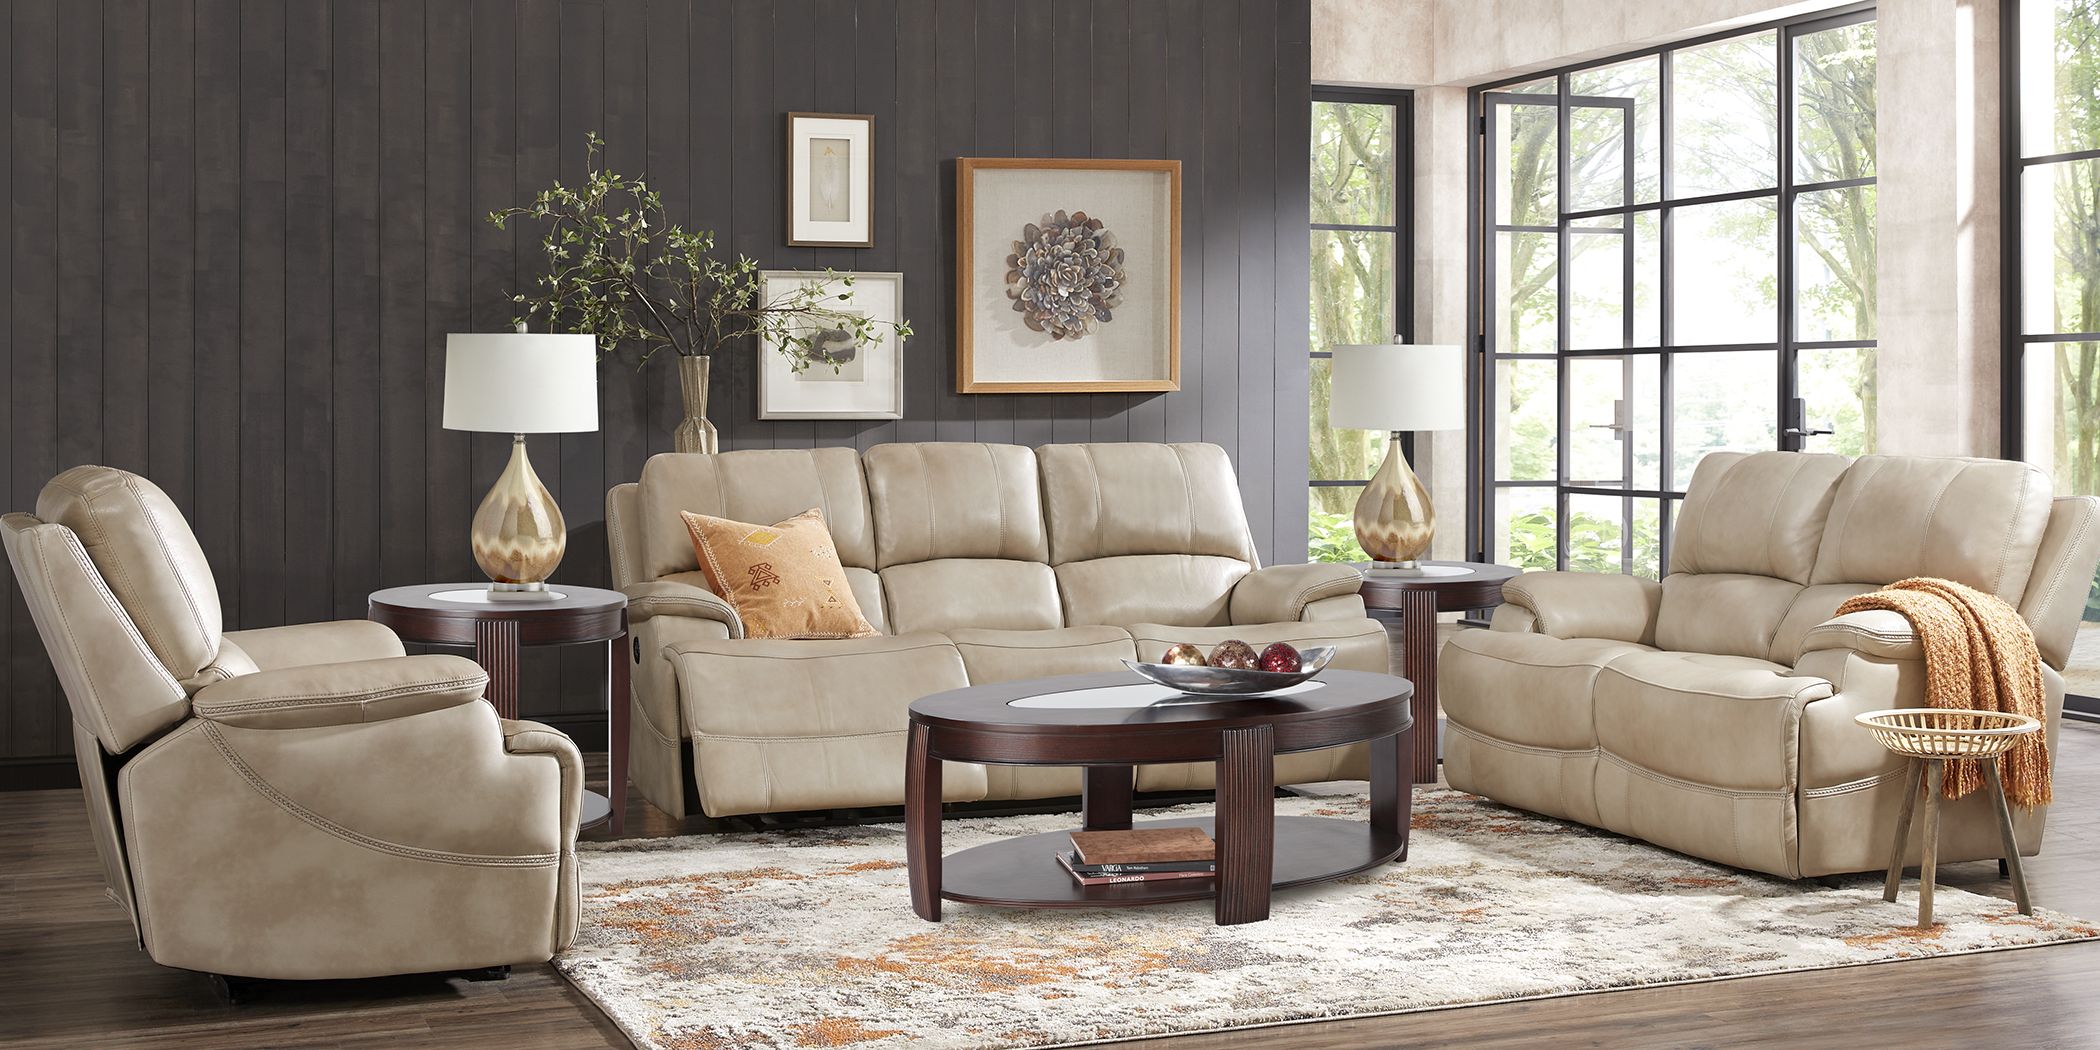 Colorado River Beige 5 Pc Leather Living Room with Reclining Sofa ...